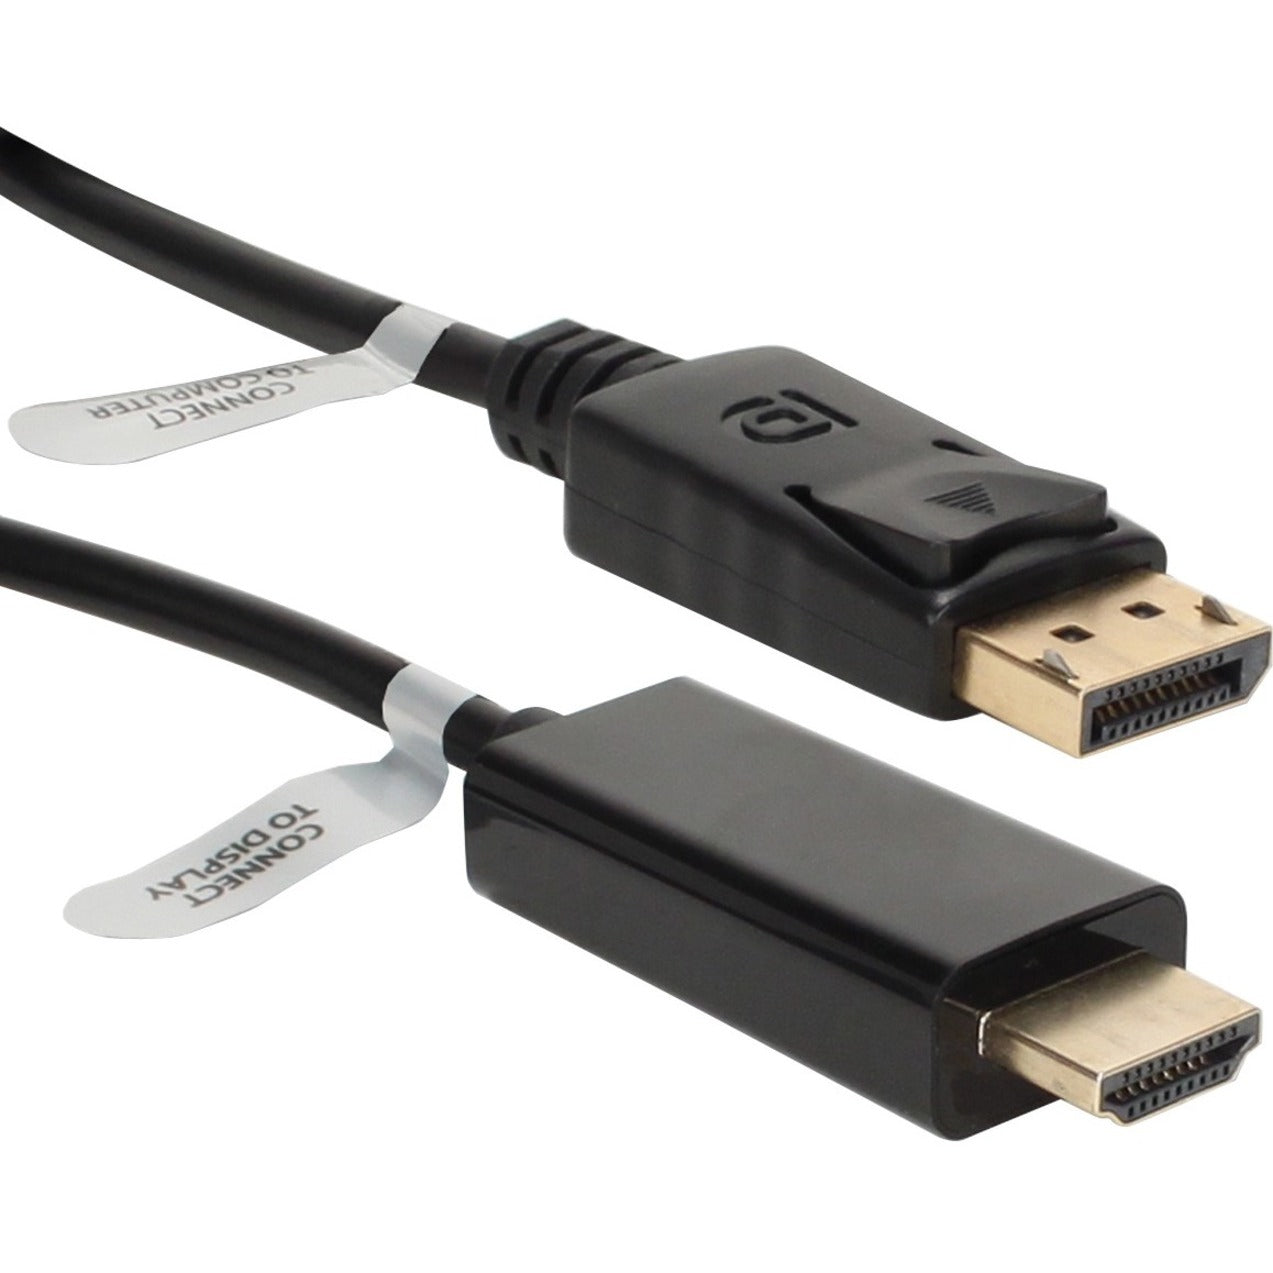 QVS DPHD-10 10ft DisplayPort to HDMI Digital A/V Cable, Locking Latch, 1920 x 1200 Supported Resolution